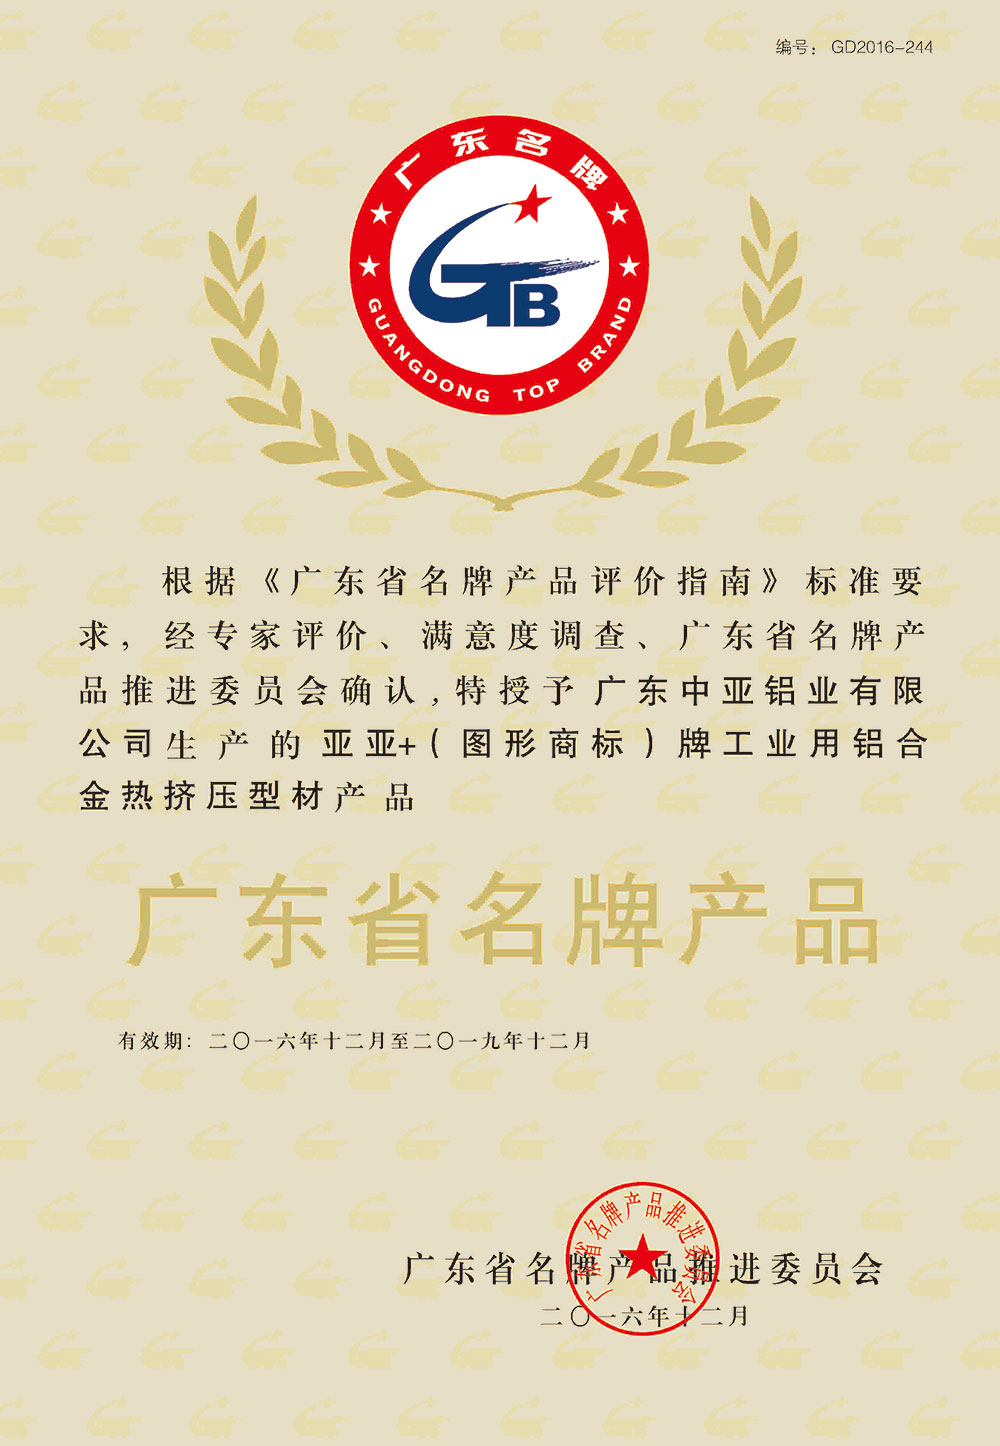 Famous brand products of guangdong province